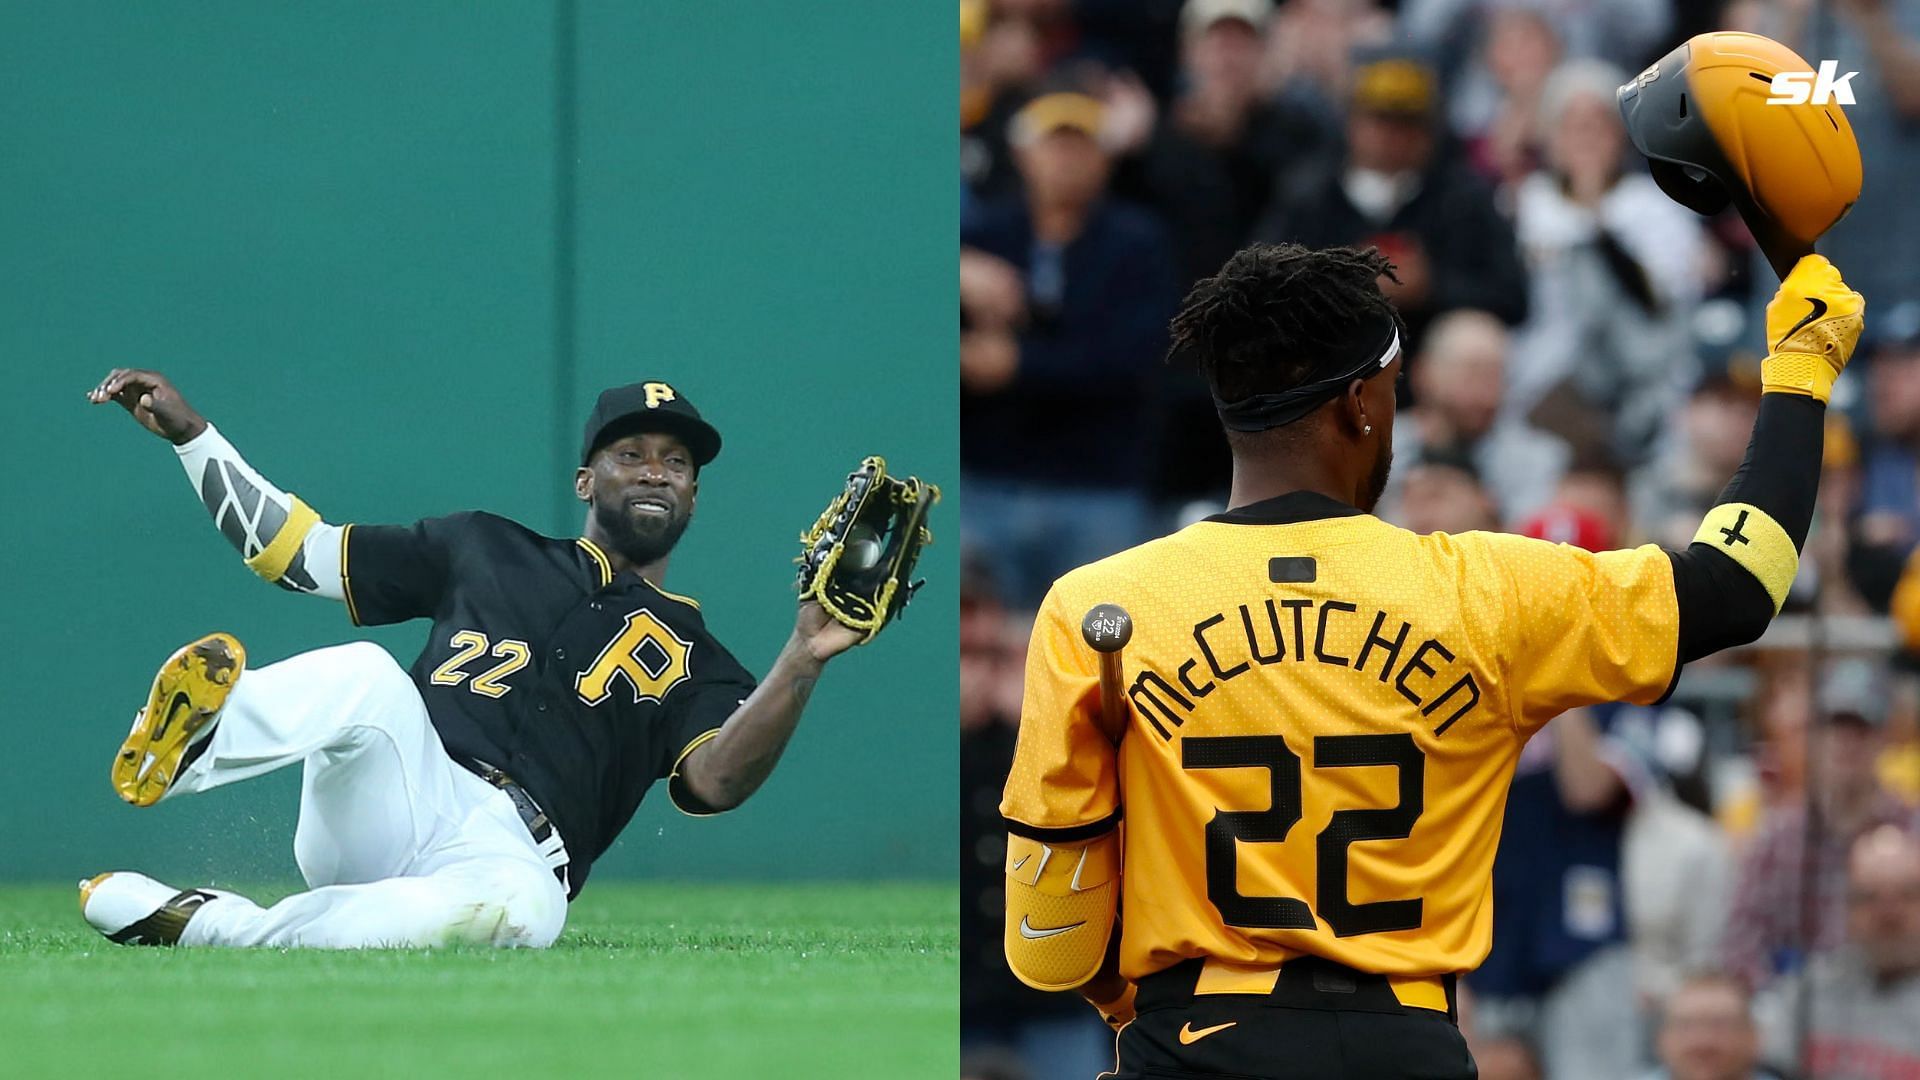 WATCH: Pittsburgh Pirates star Andrew McCutchen plays catch with sons before game against Brewers